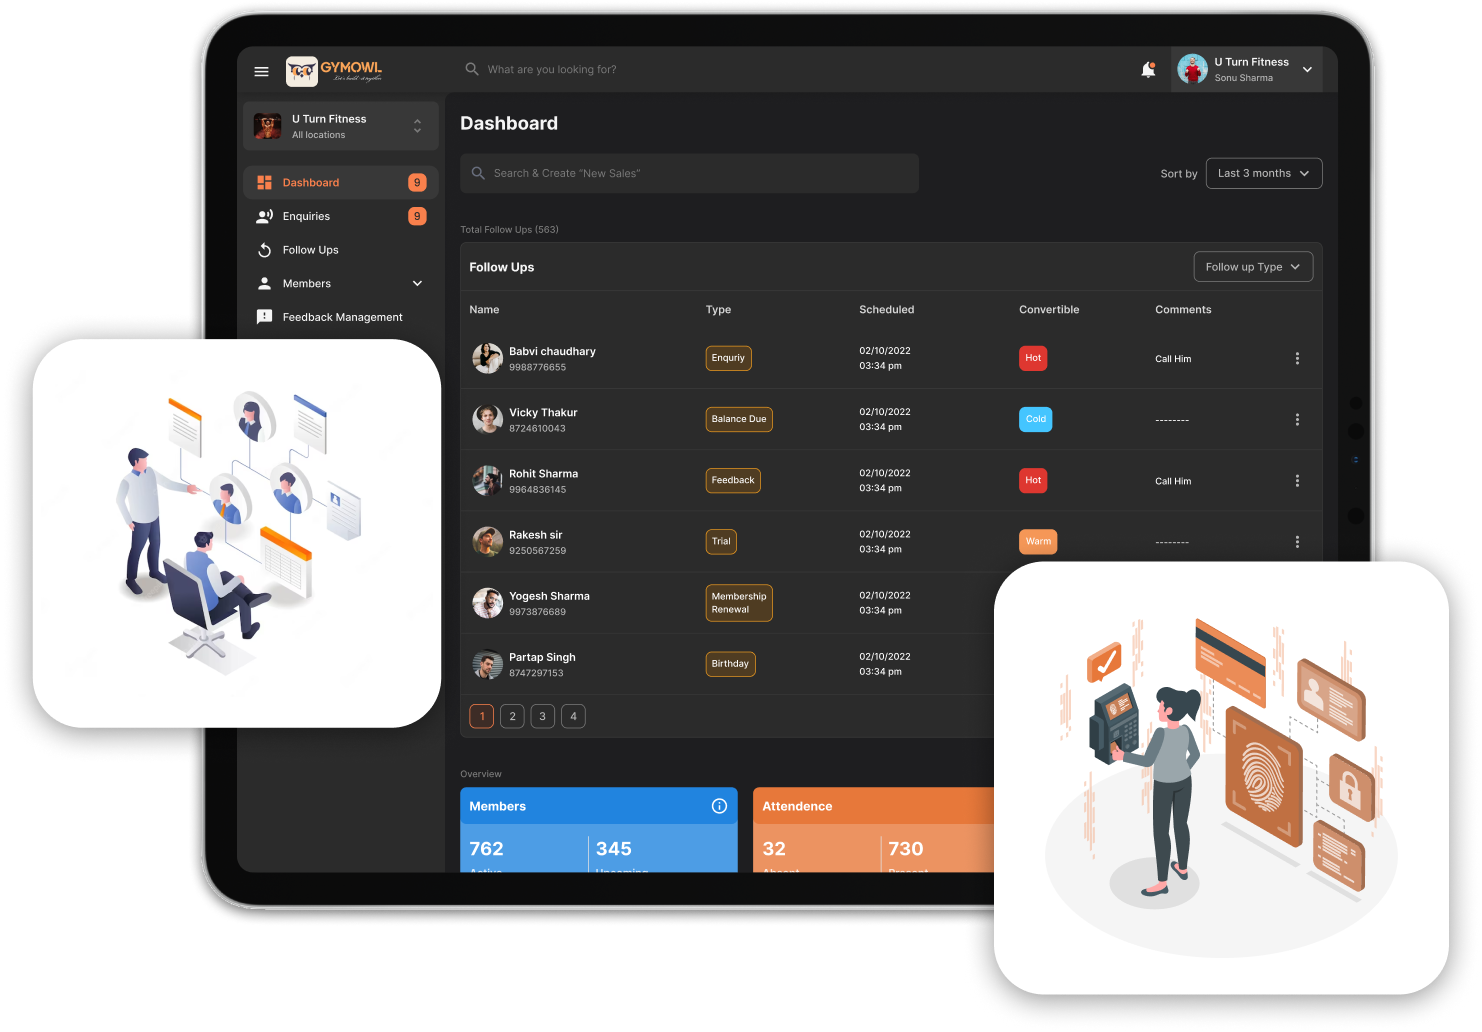 Top Fitness Club Management Software